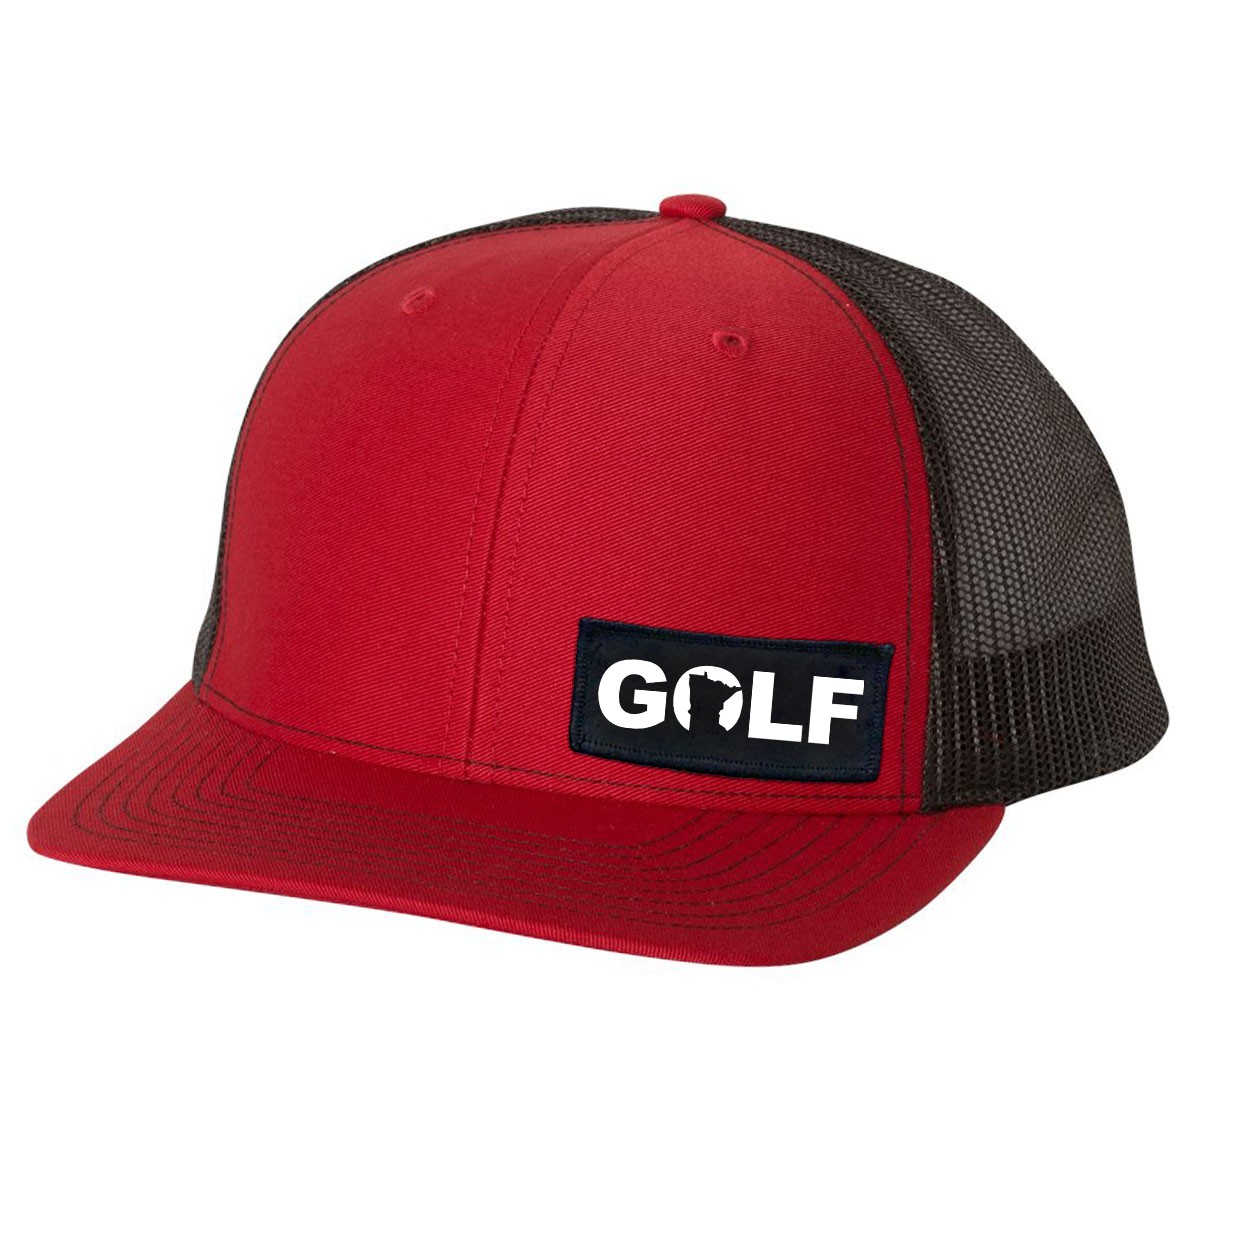 Golf Minnesota Night Out Woven Patch Snapback Trucker Hat Red/Black (White Logo)